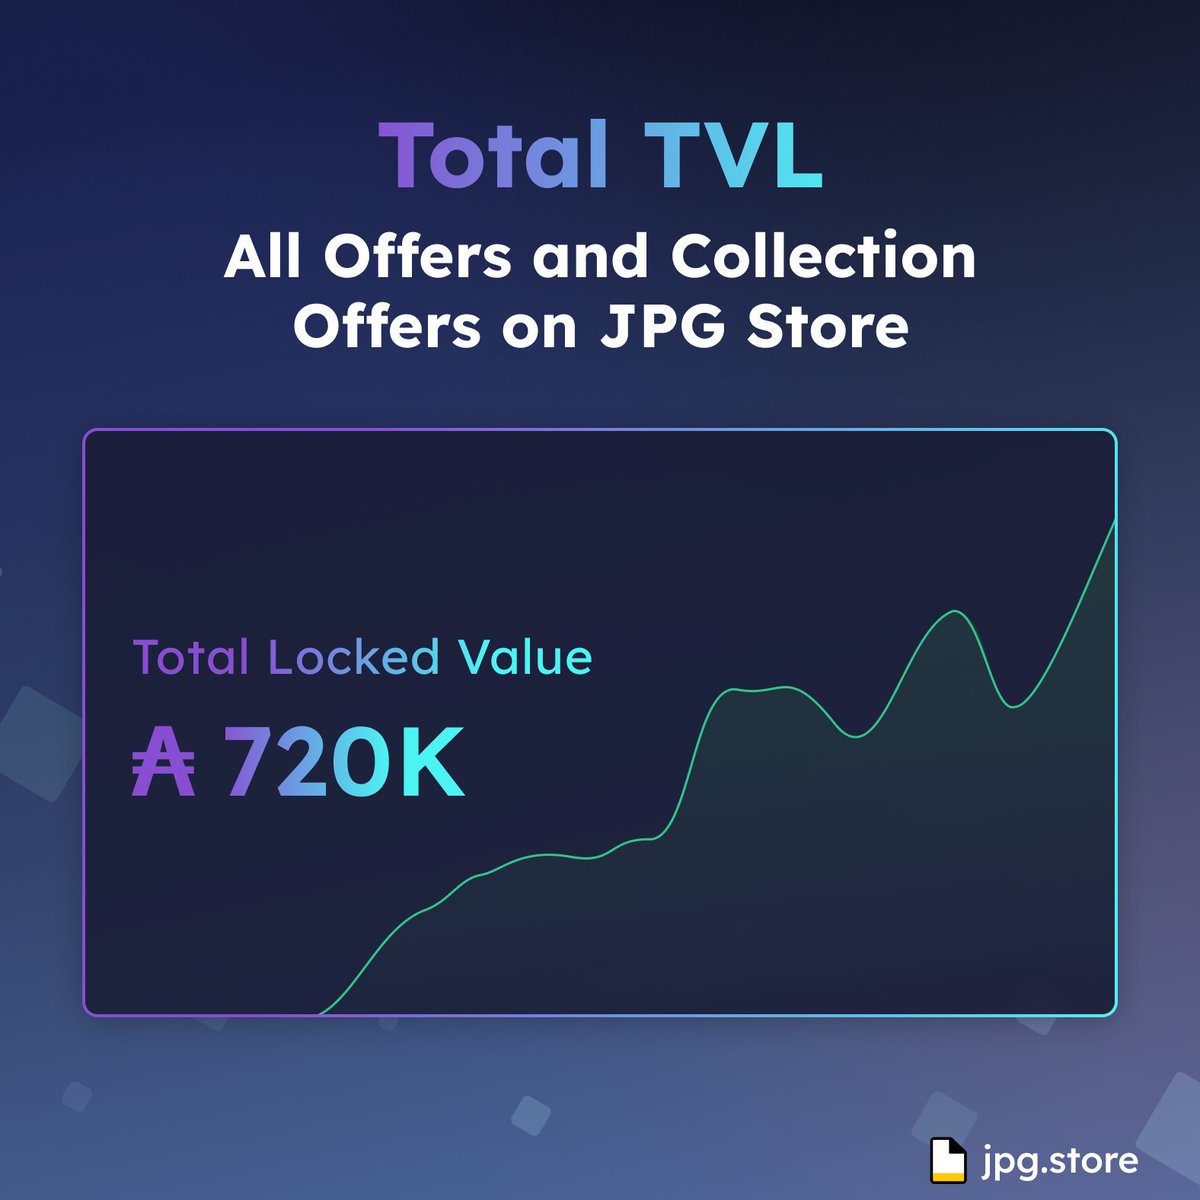 The Cardano NFT liquidity you need is on JPG Store 🔓 Over 720,000 ADA is now allocated to Offers and Collection Offers on our site ✅